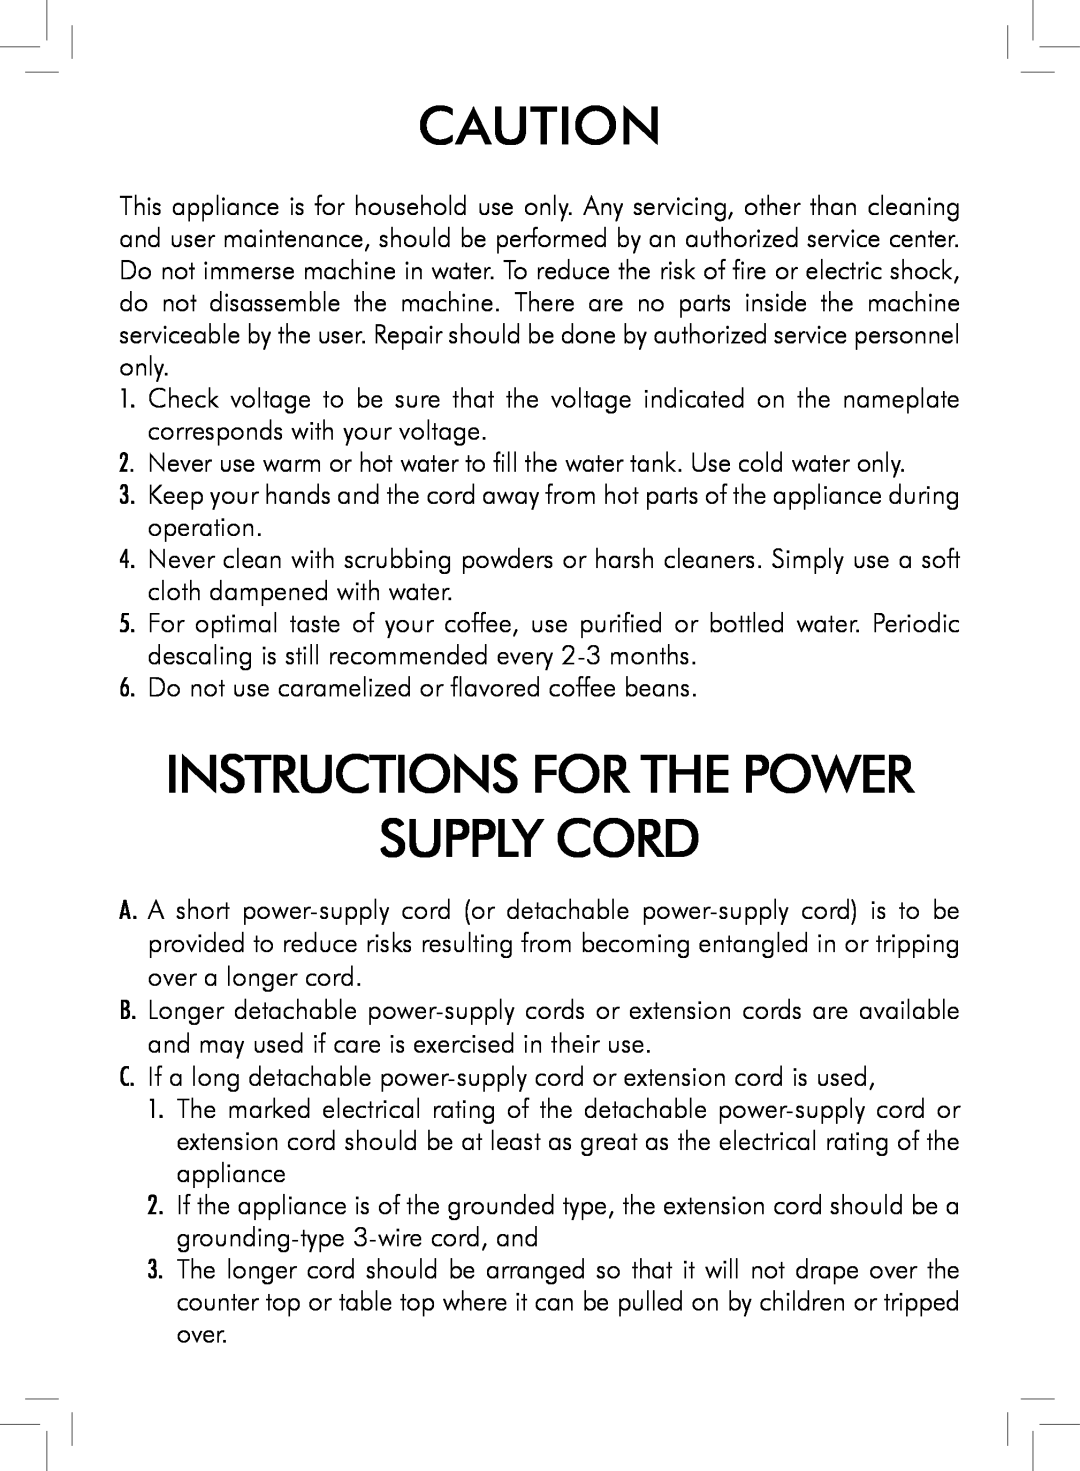 Saeco Coffee Makers HD8775 user manual Instructions For The Power Supply Cord 